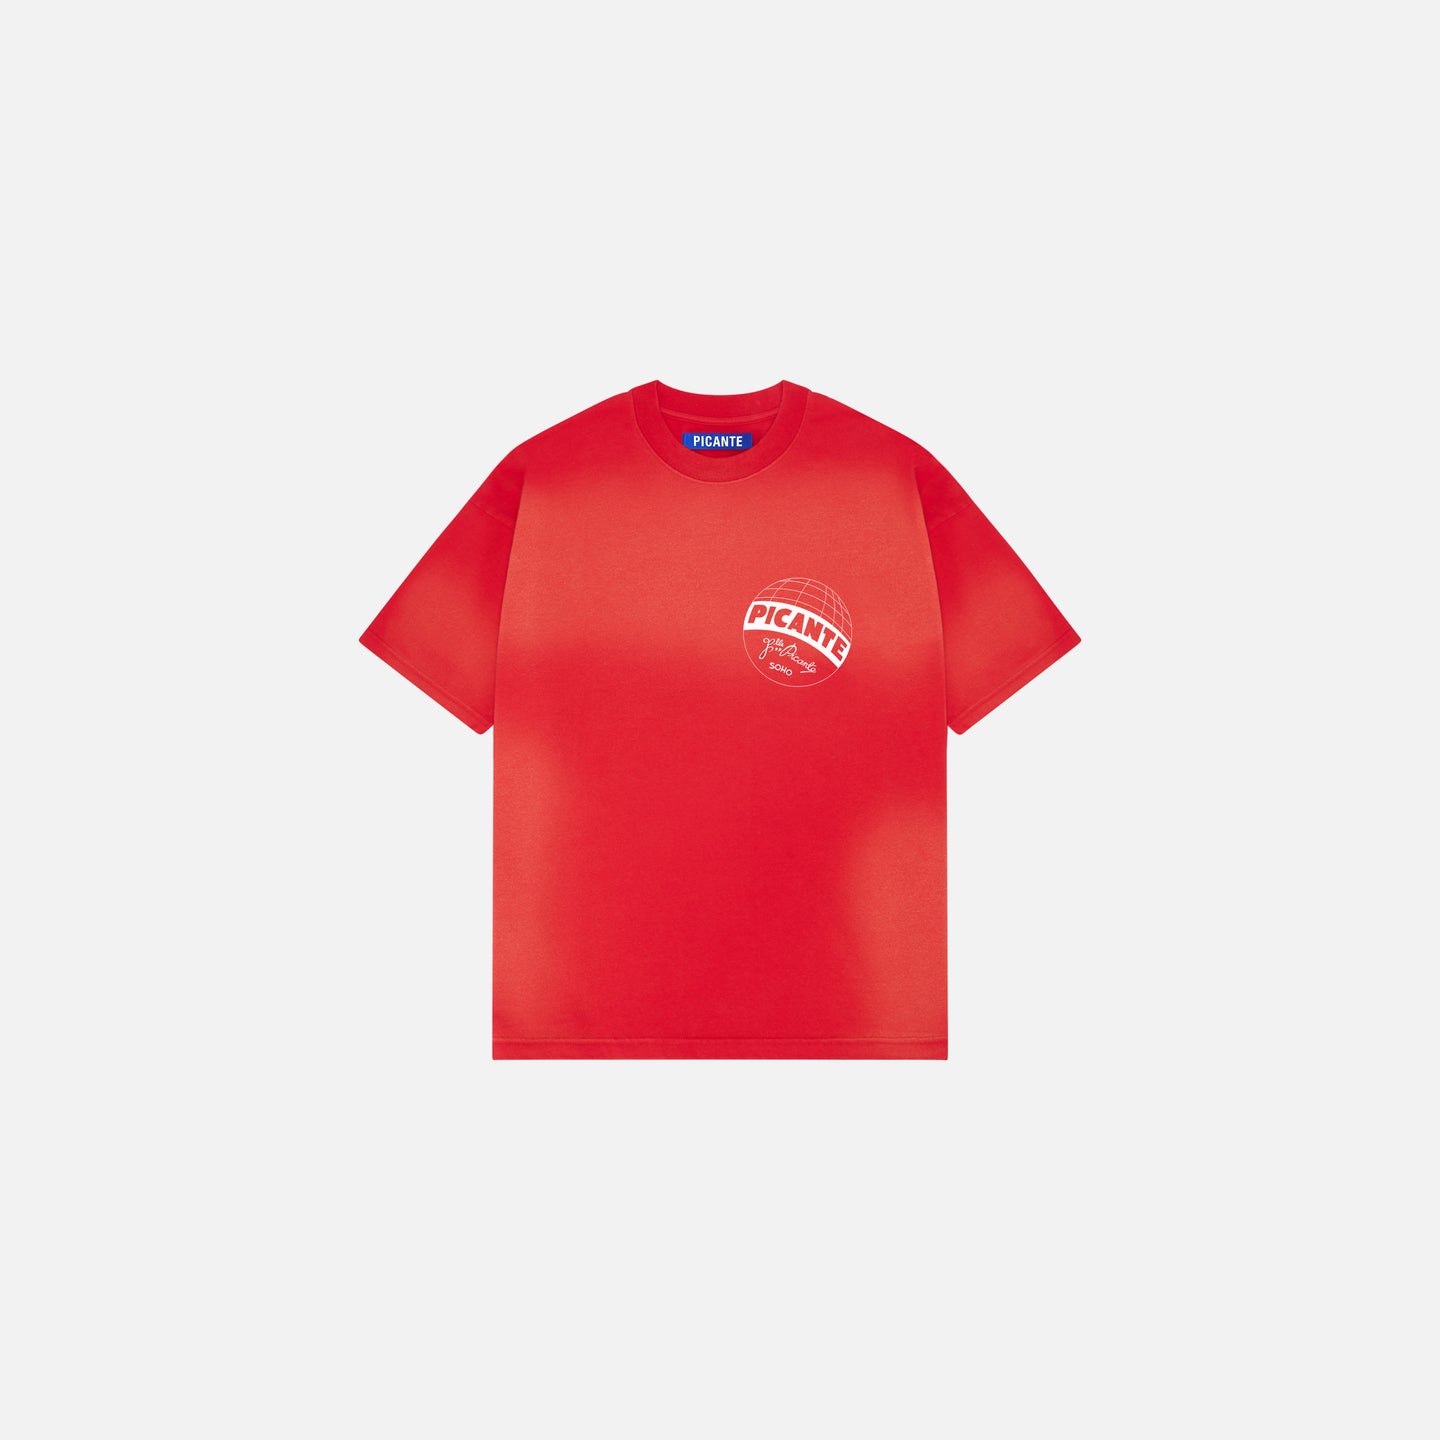 TEAM FRATELLI T-SHIRT SUN-FADED RED